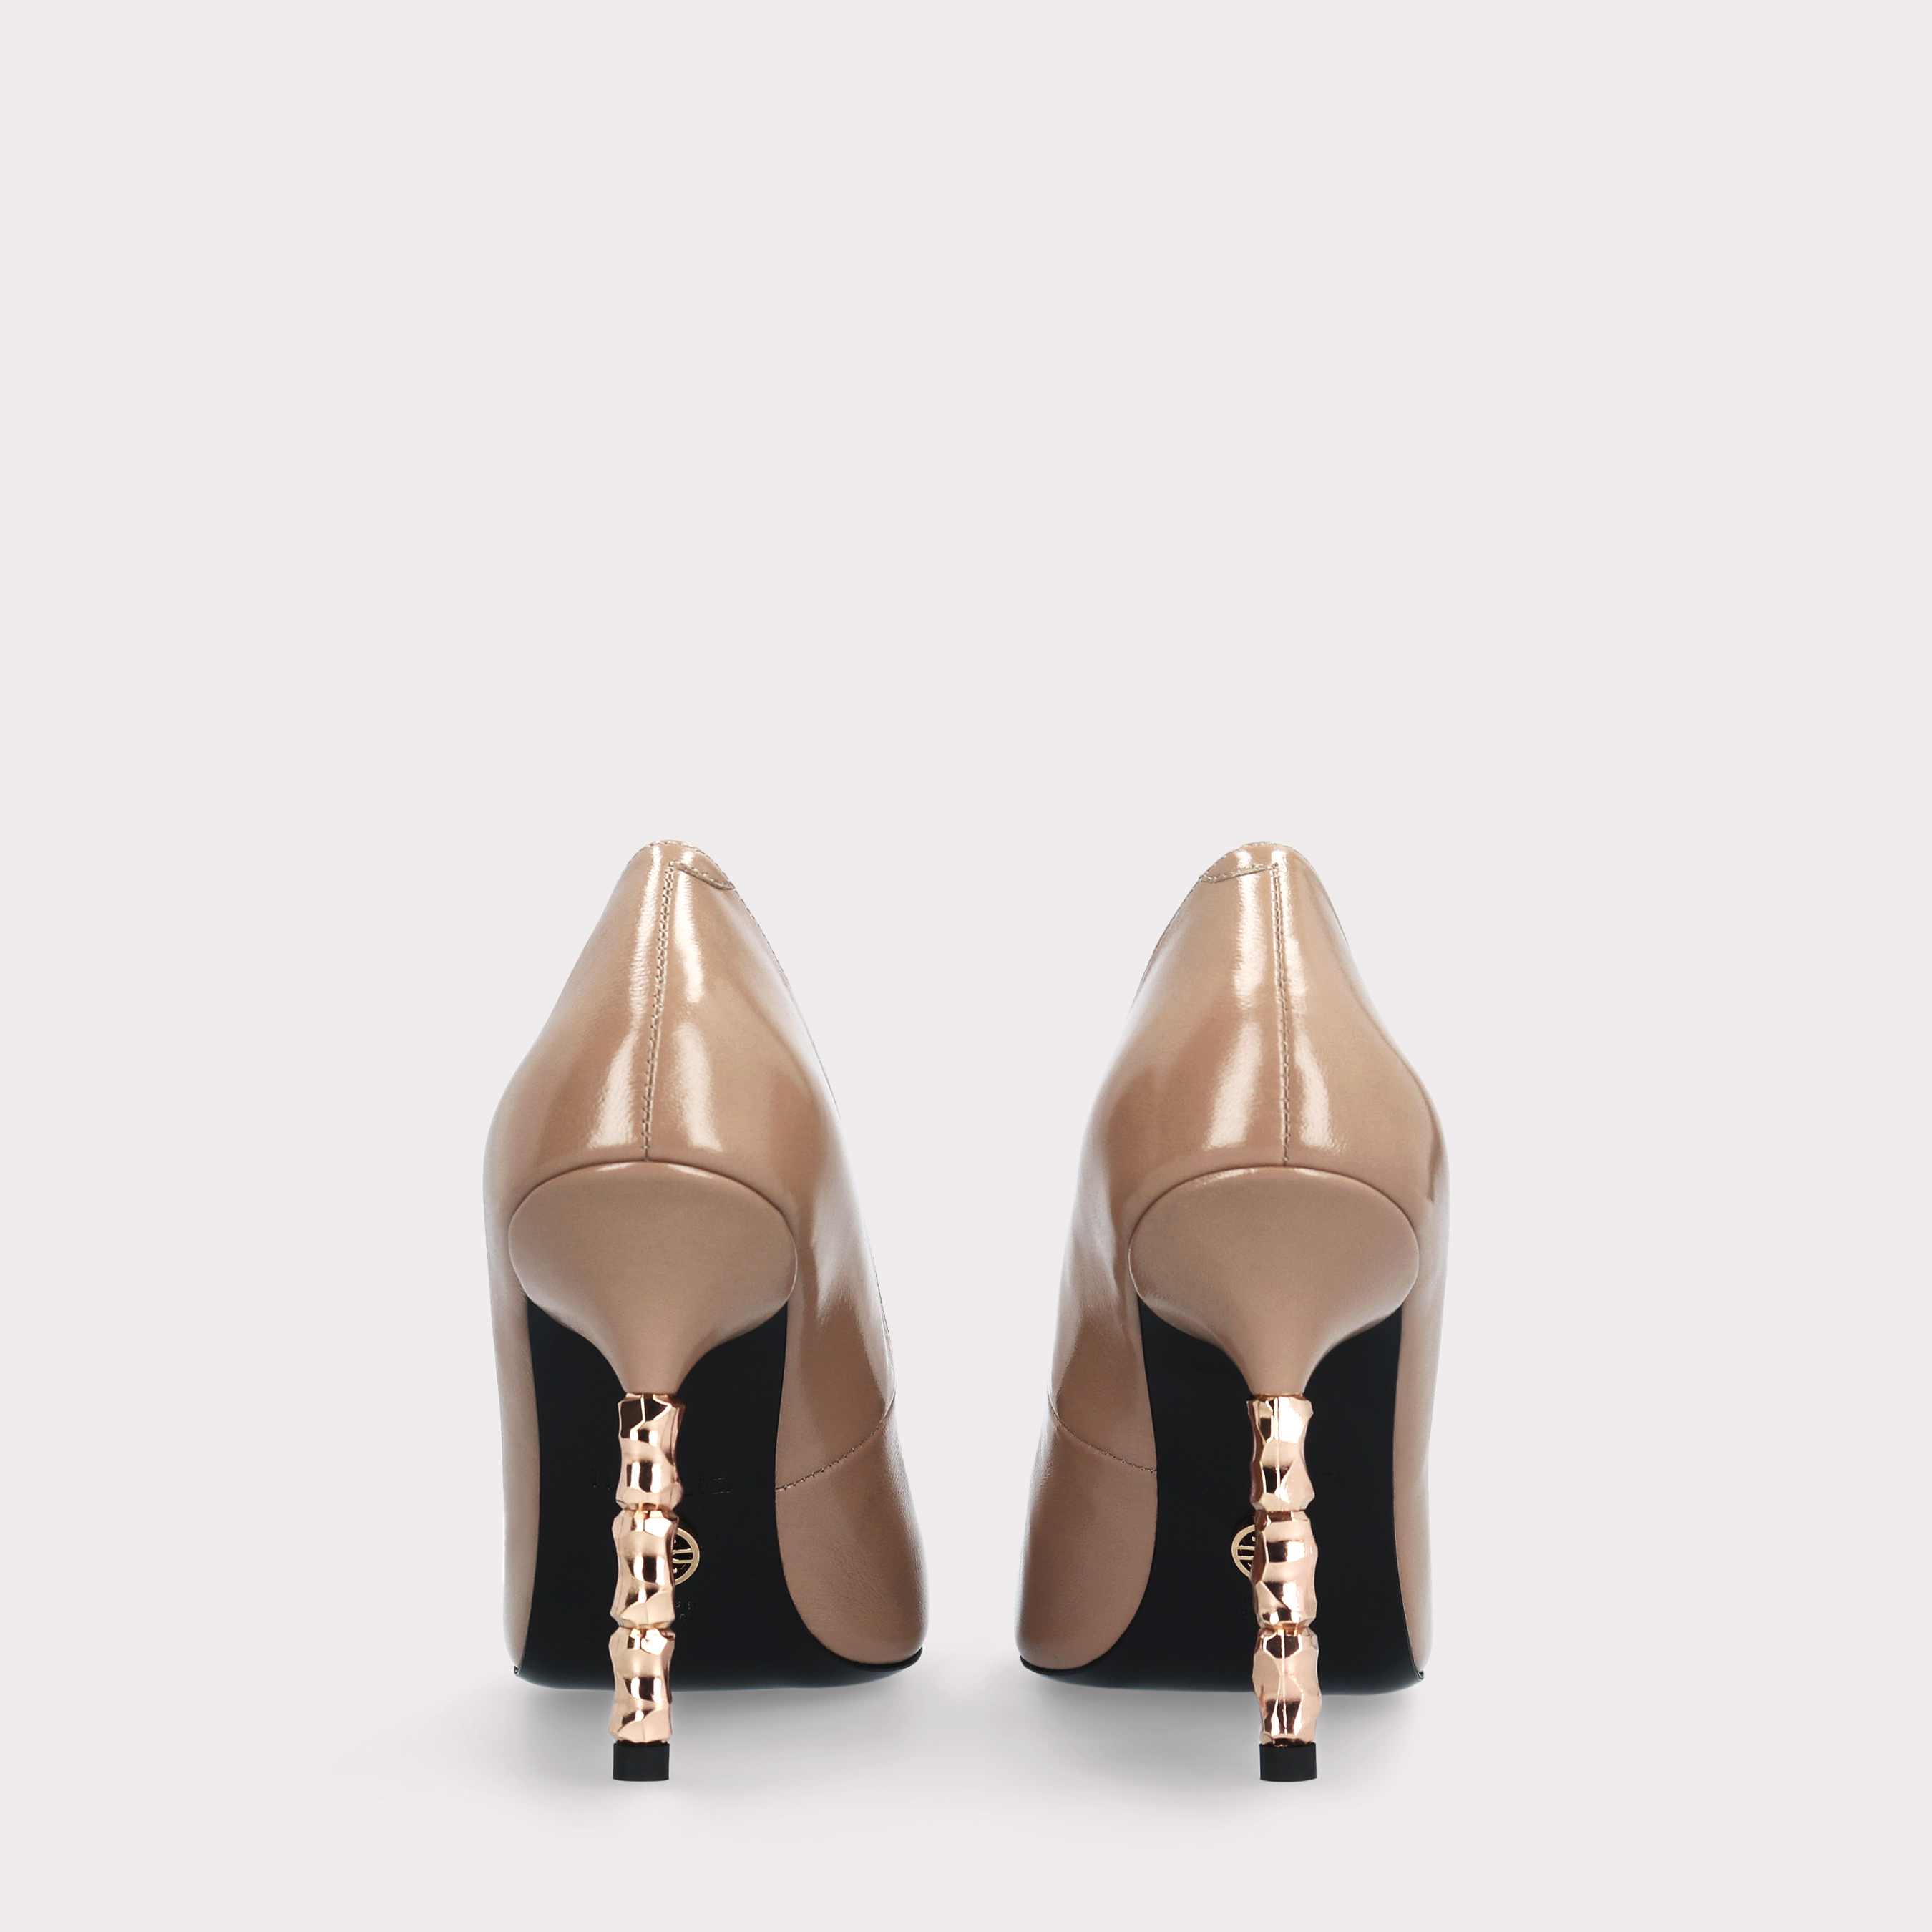 ASTRID DEC 03 NUDE GLOSS LEATHER PUMPS